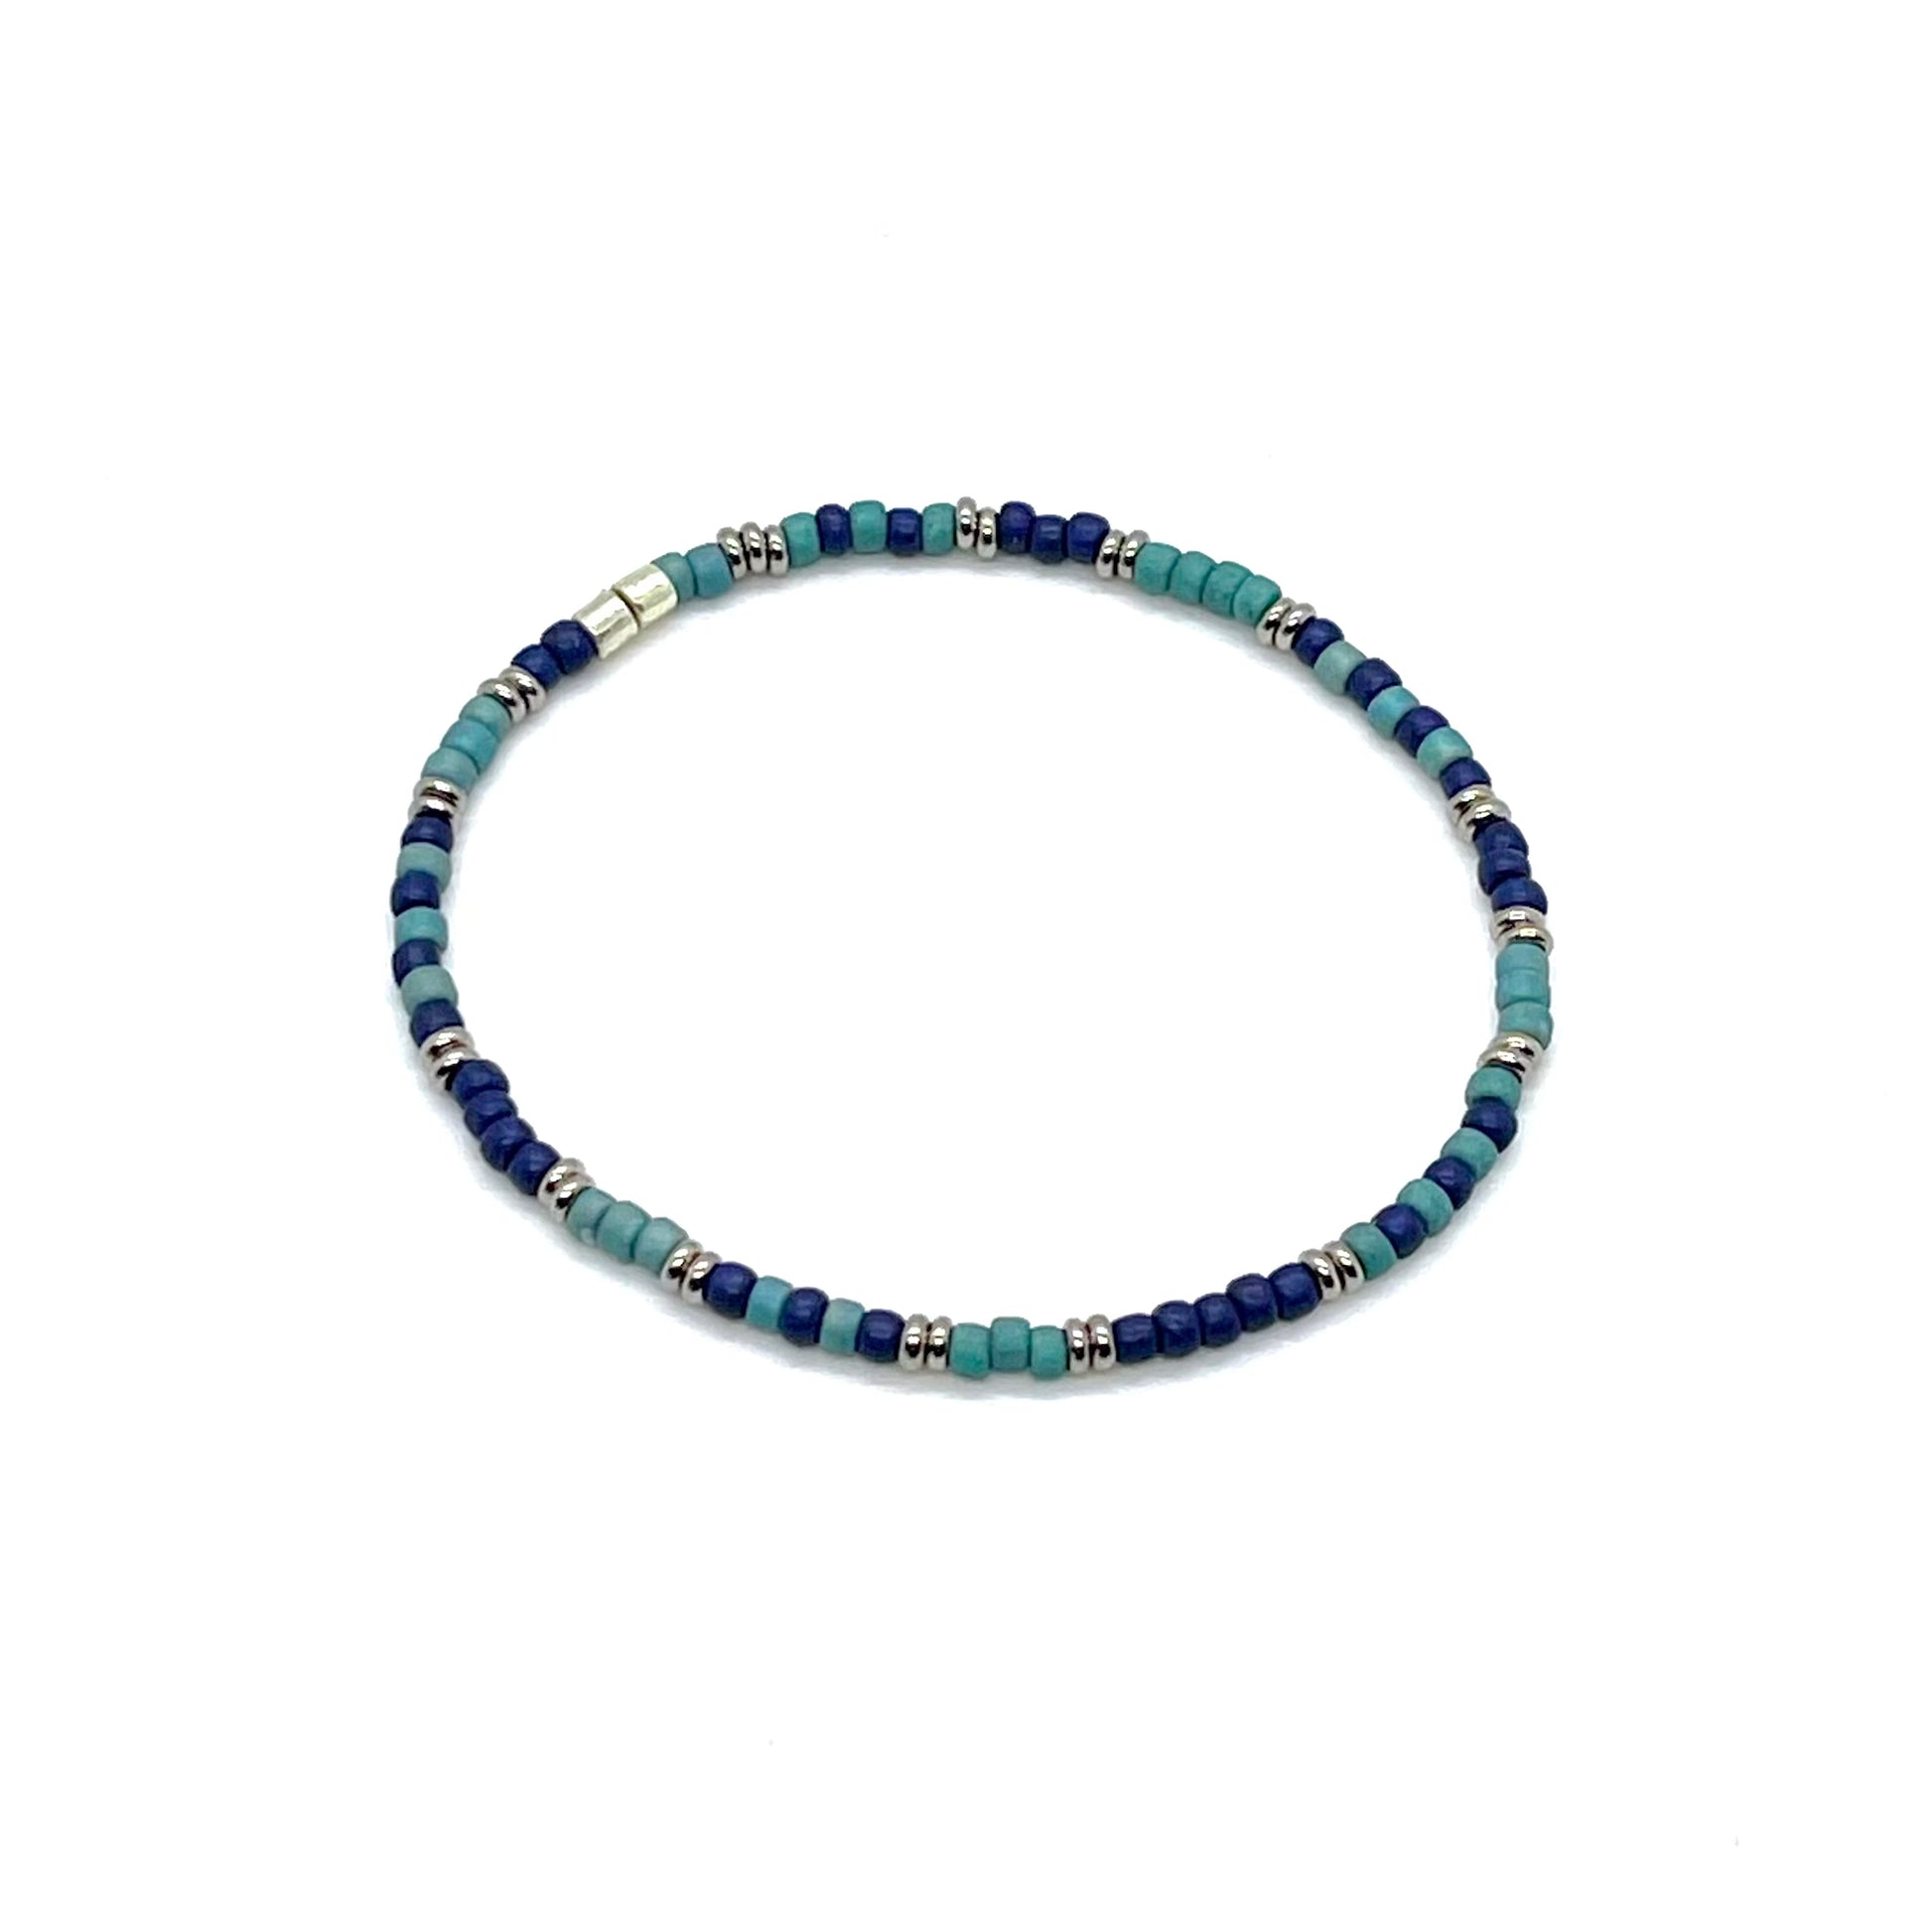 Blue and silver tone glass seed bead thin stretch bracelet for men.